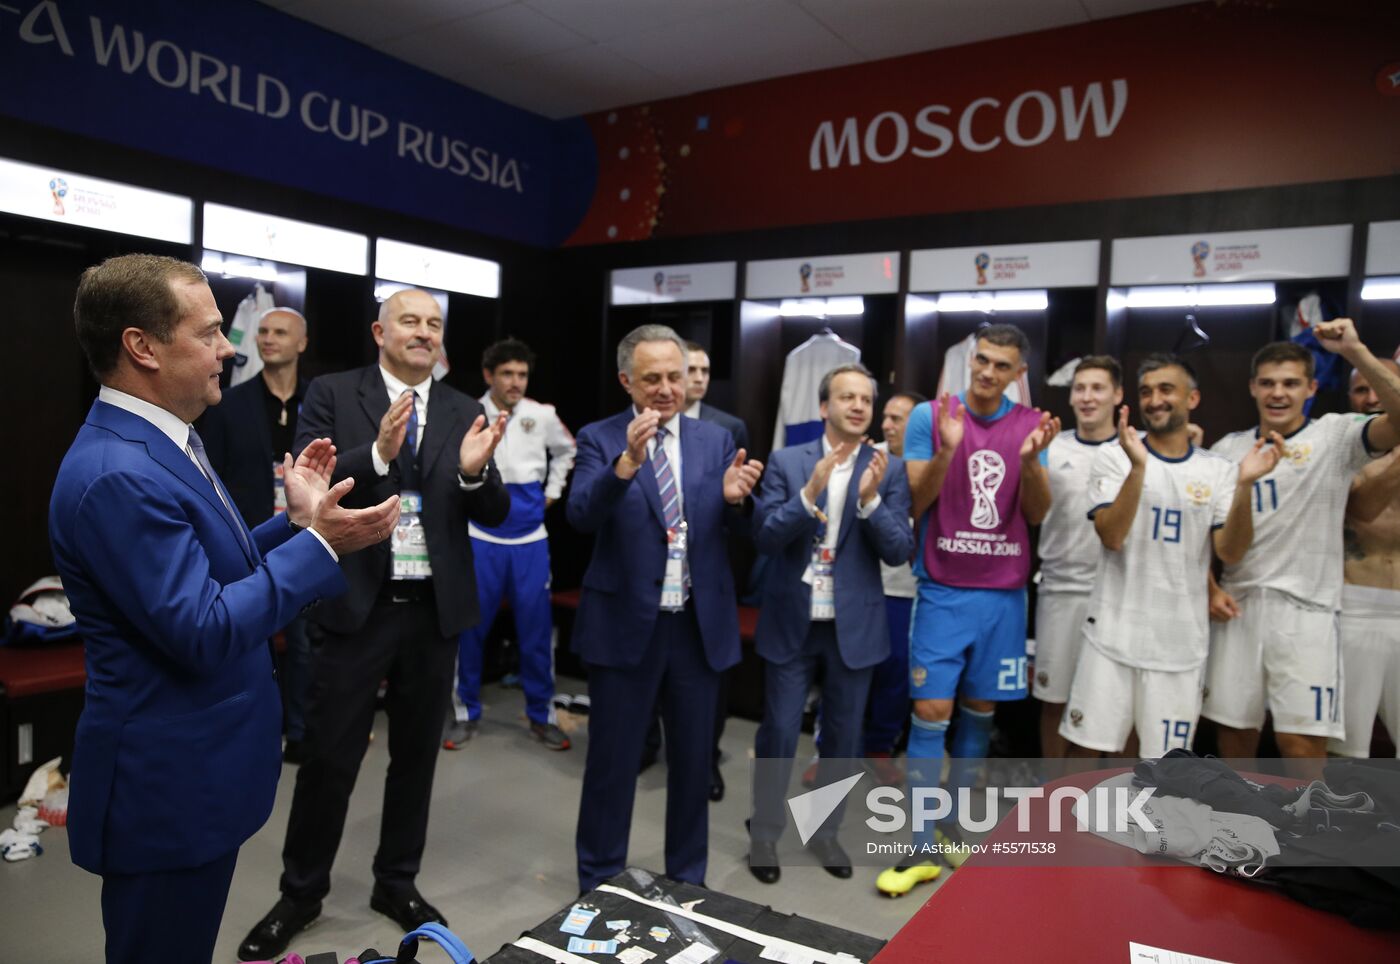 Prime Minister Dmitry Medvedev attends 2018 World Cup match between Russia and Spain